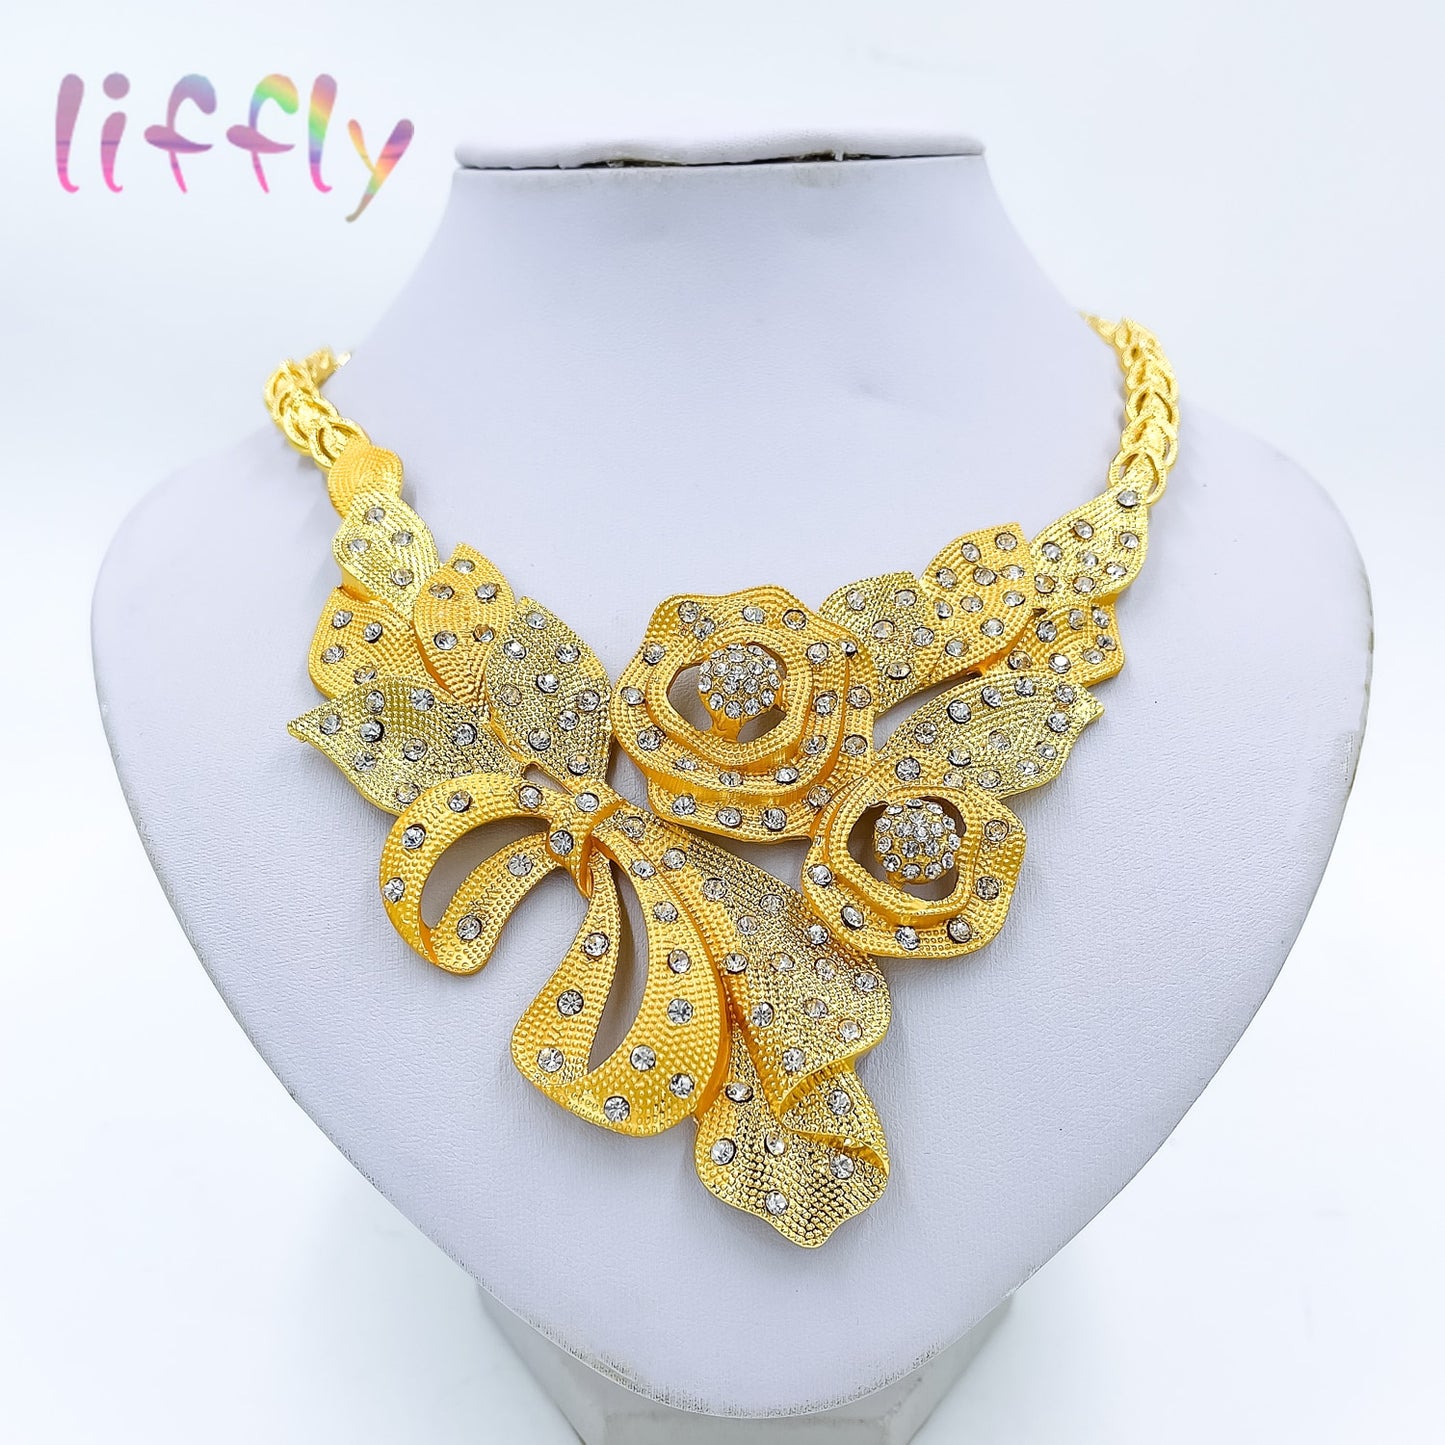 Liffly 2022 New Flower Type Necklace Sets for Women Fashion Earrings Ring Crystal Jewelry Sets Bridal Necklace Gift